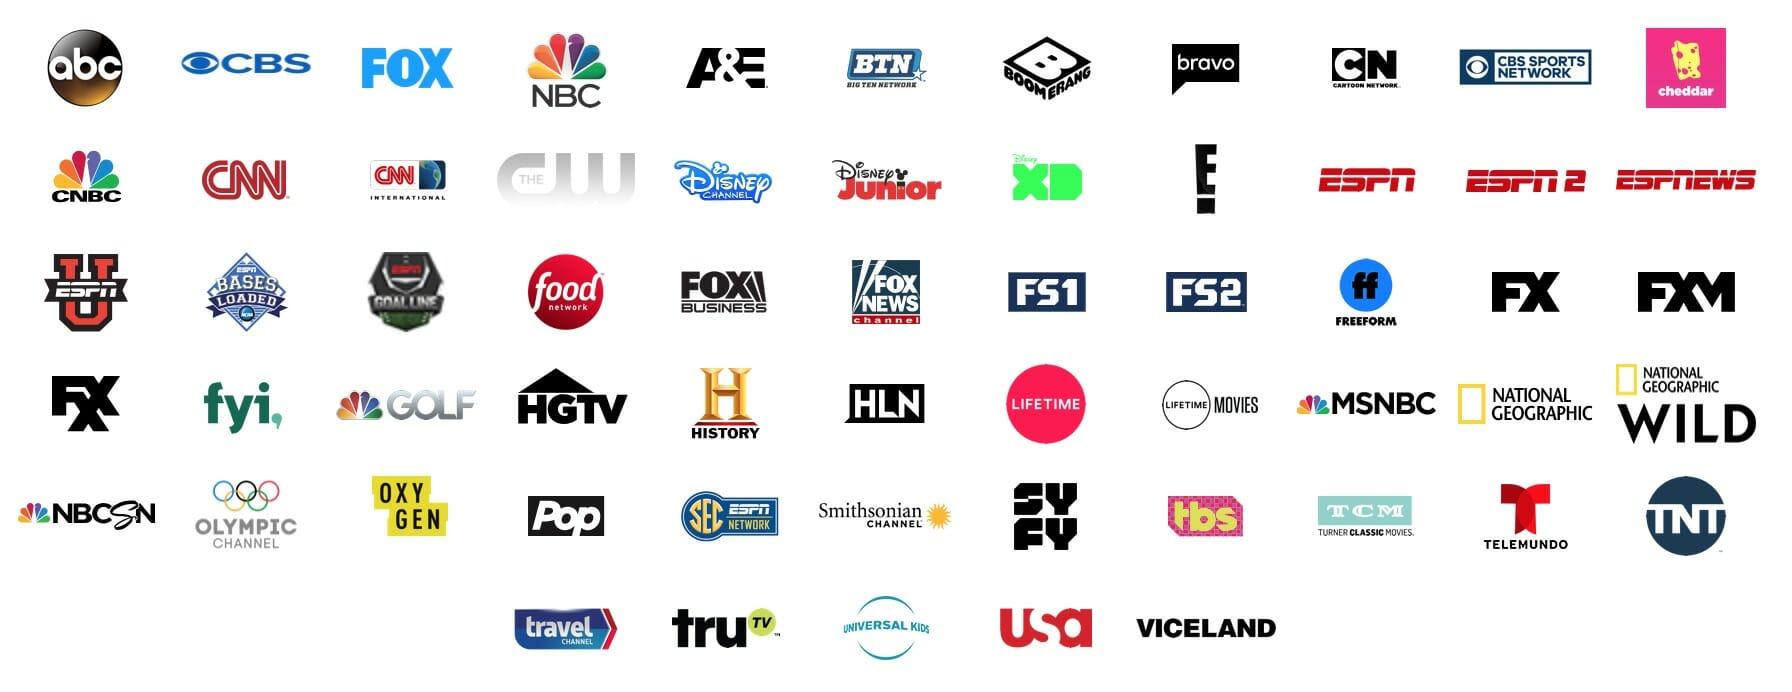 Hulu NBC Logo - Hulu Live TV Channels: The Complete Channel List, Devices & Add-ons